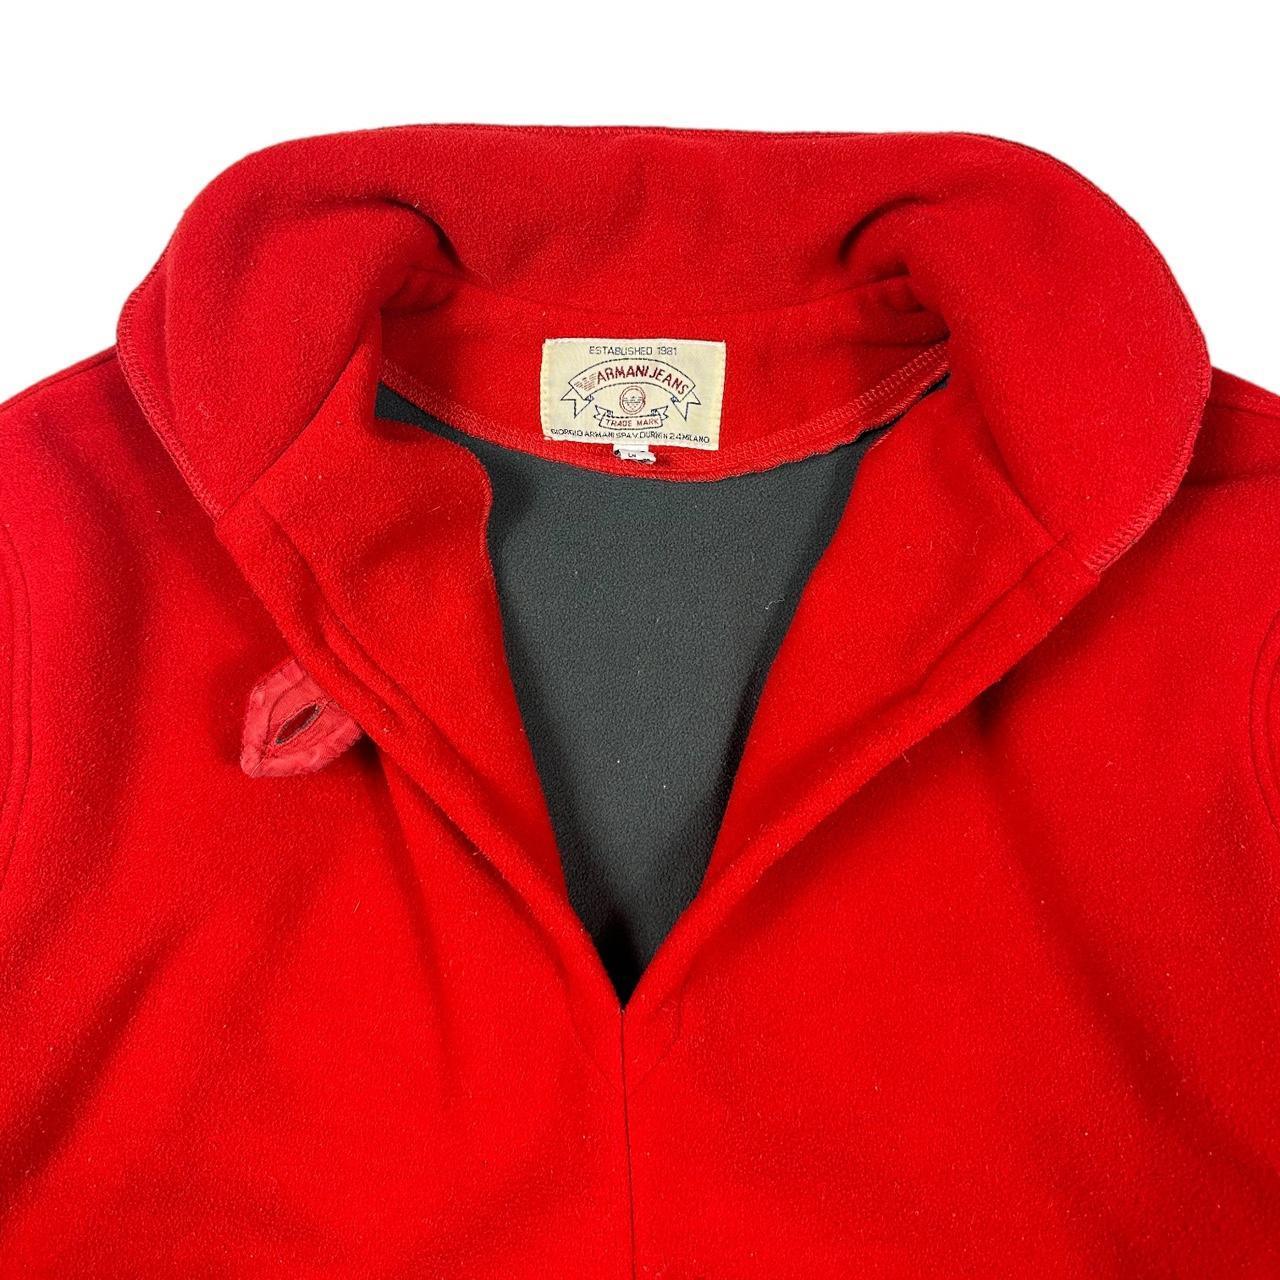 Vintage 1990s Armani Jeans Red Fleece Top - Known Source